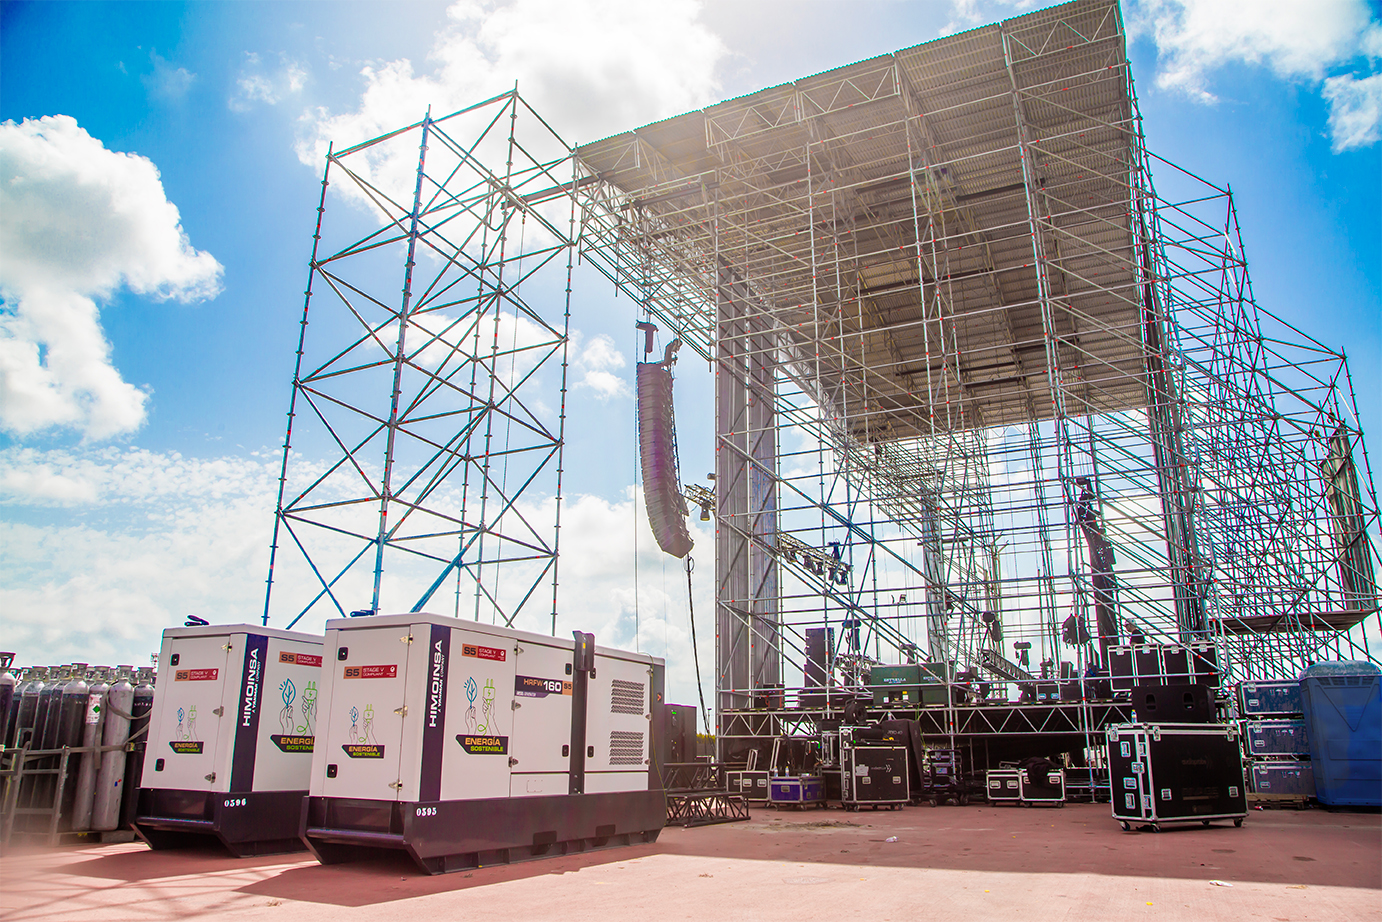 HIMOINSA has supplied power at the 'Fan Futura Fest' sustainable festival.